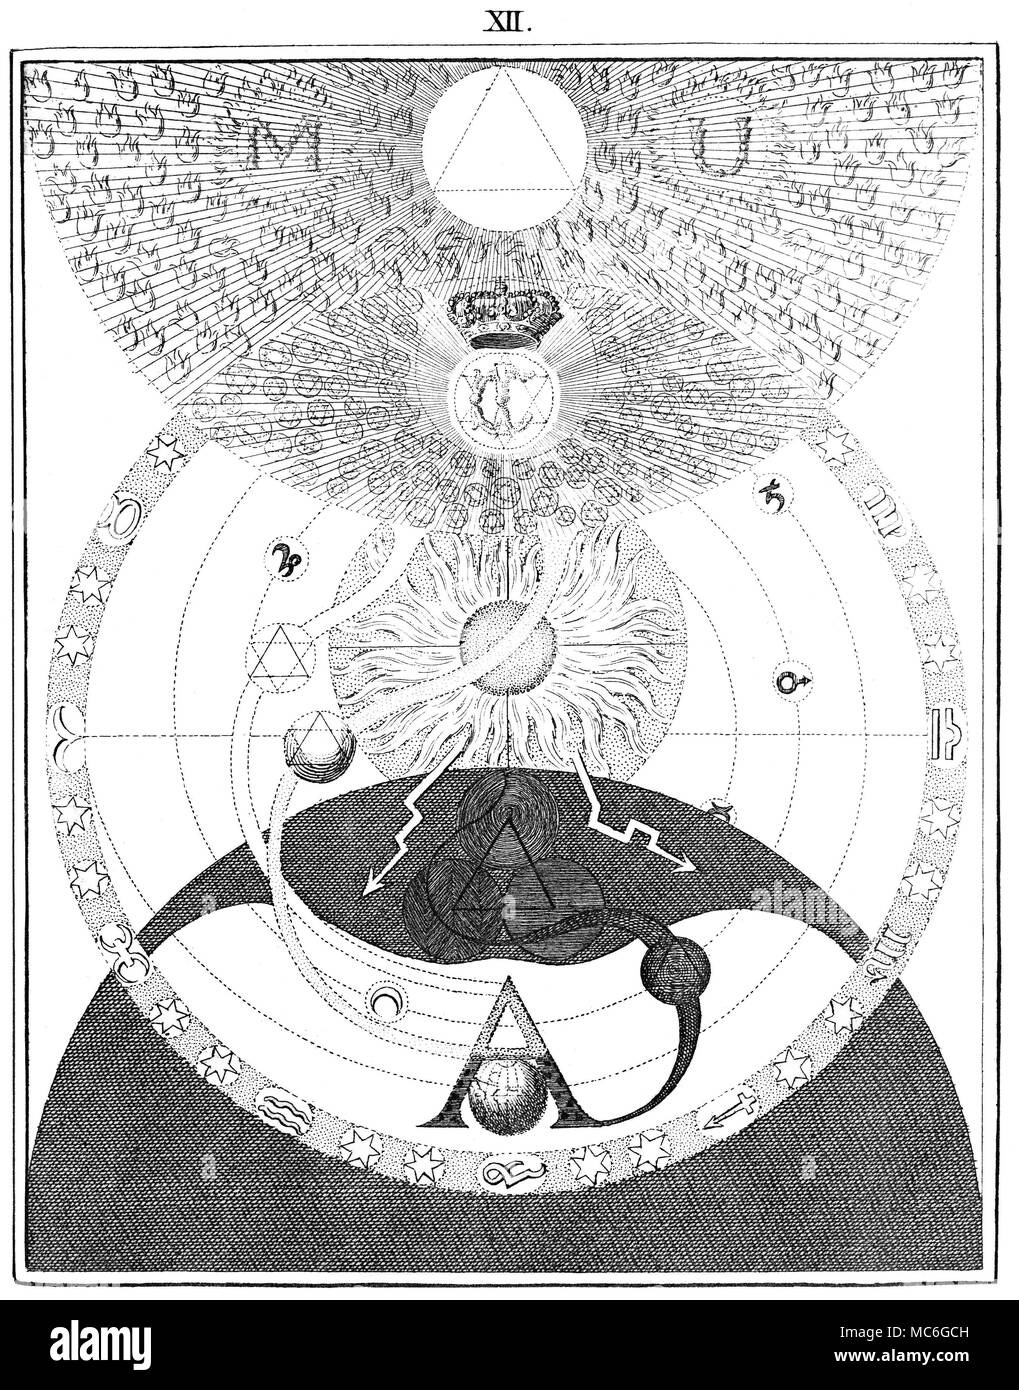 SYMBOLS - OCCULT ART - ROSICRUCIANS - SEPARATION One of a series of  influential occult engravings by William Law, in explication of the  principles in the arcane thought of the Rosicrucian, Jacob